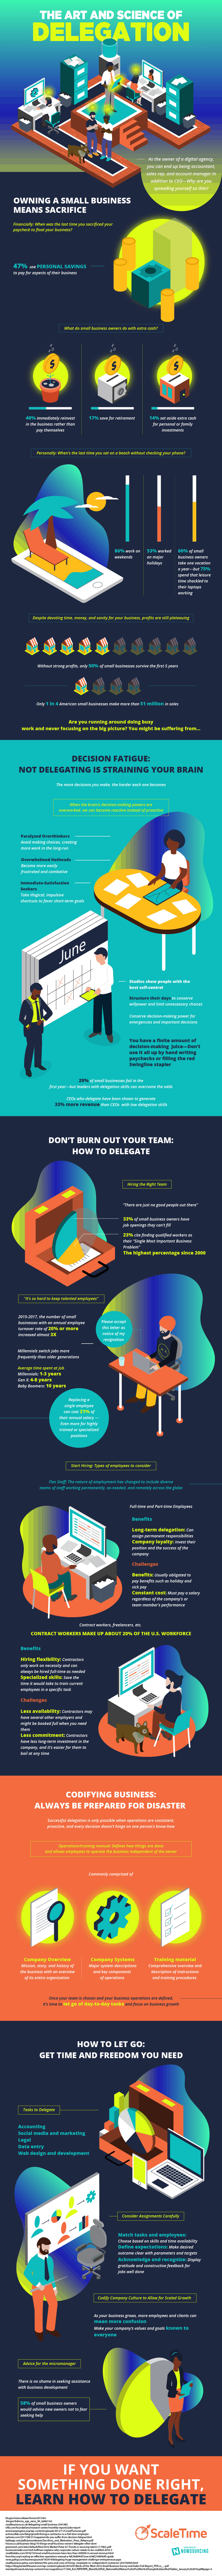 The Art and Science of Delegation Infographic